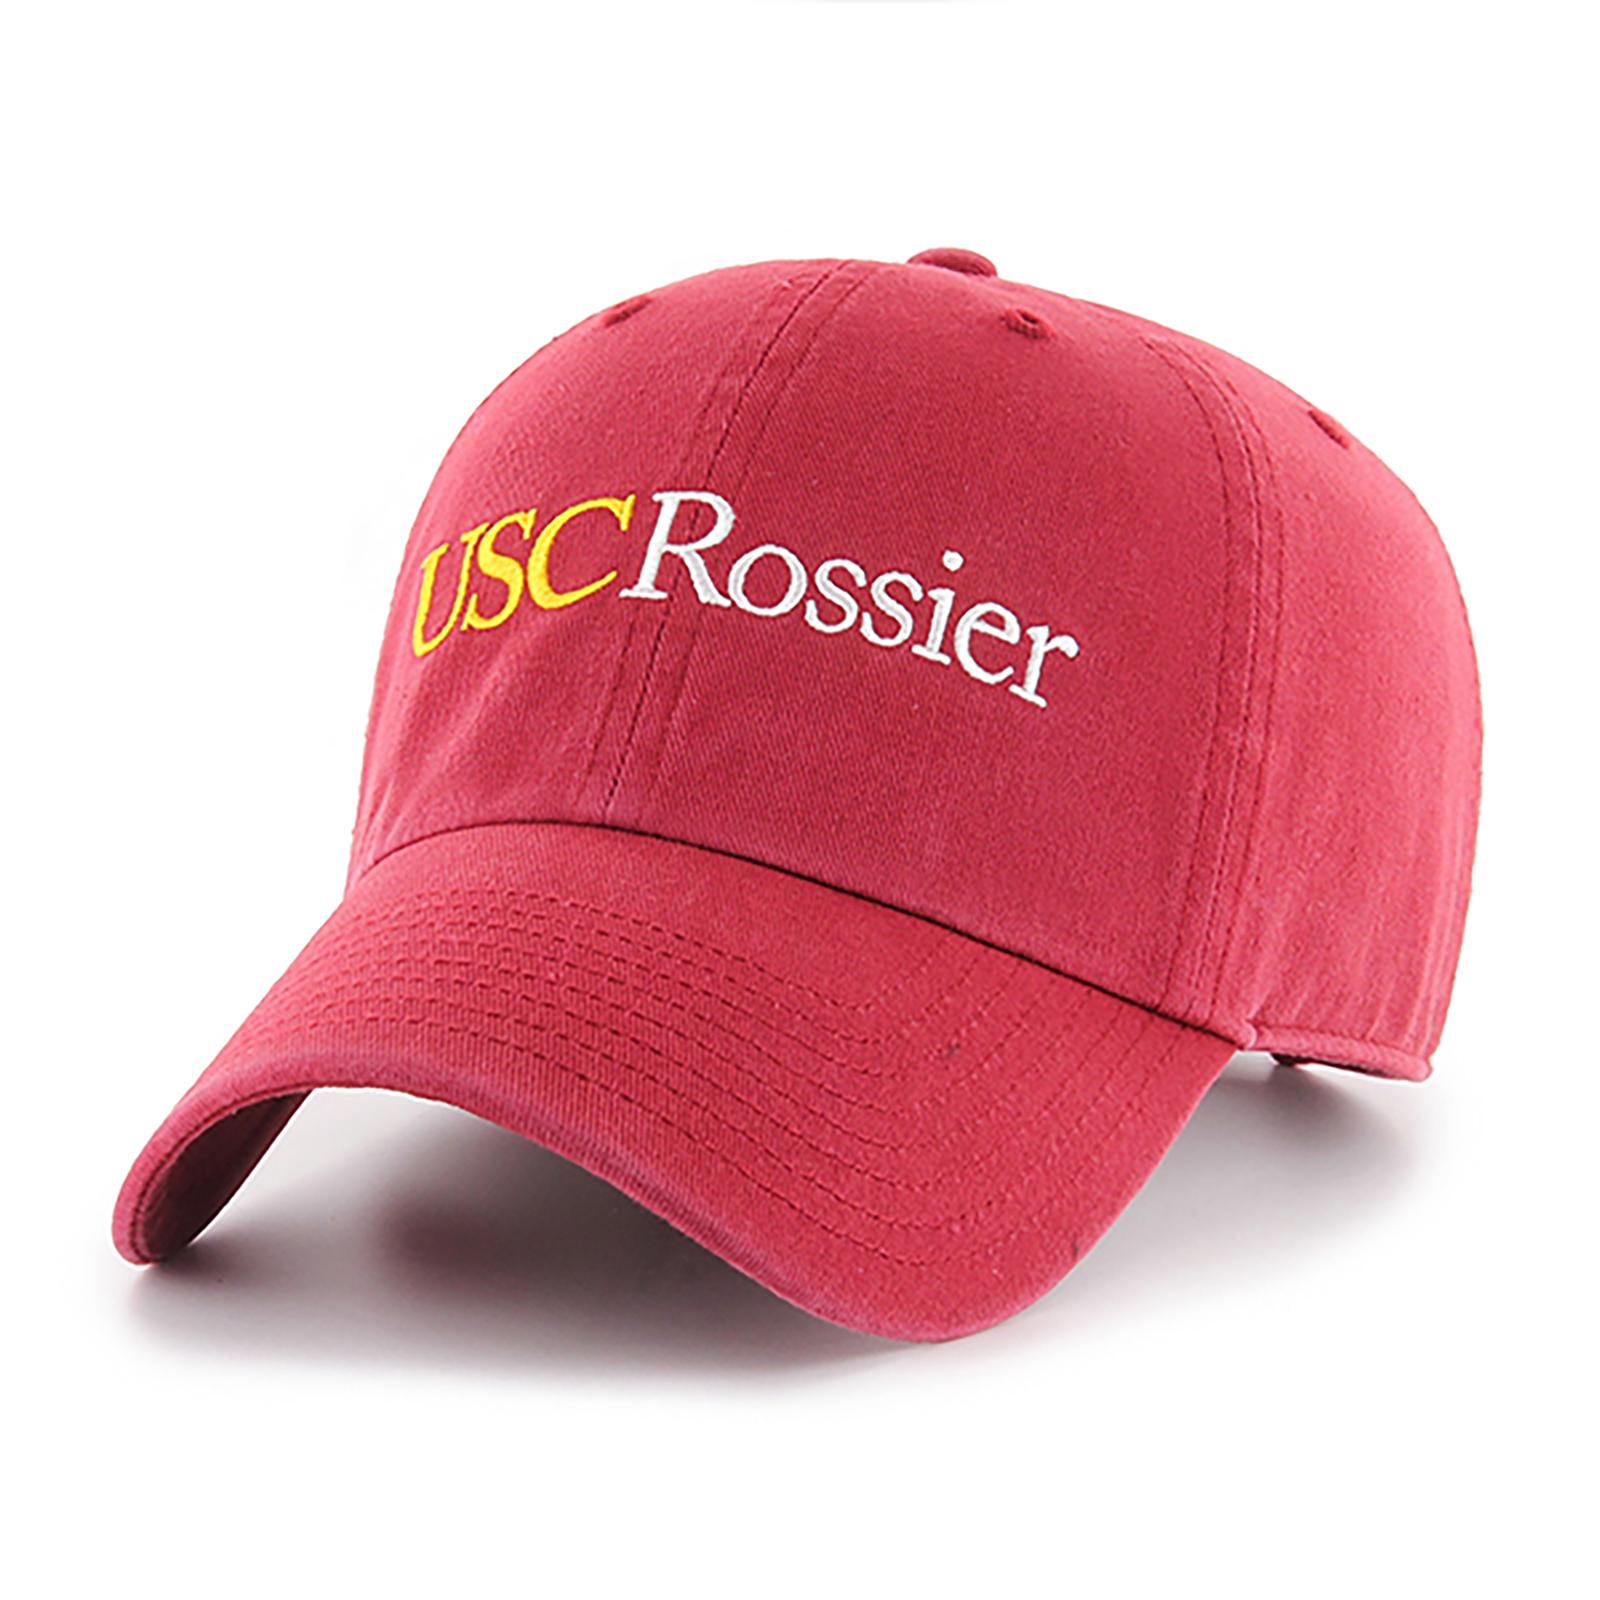 USC School of Rossier Education Cap Cardinal Fits All image01